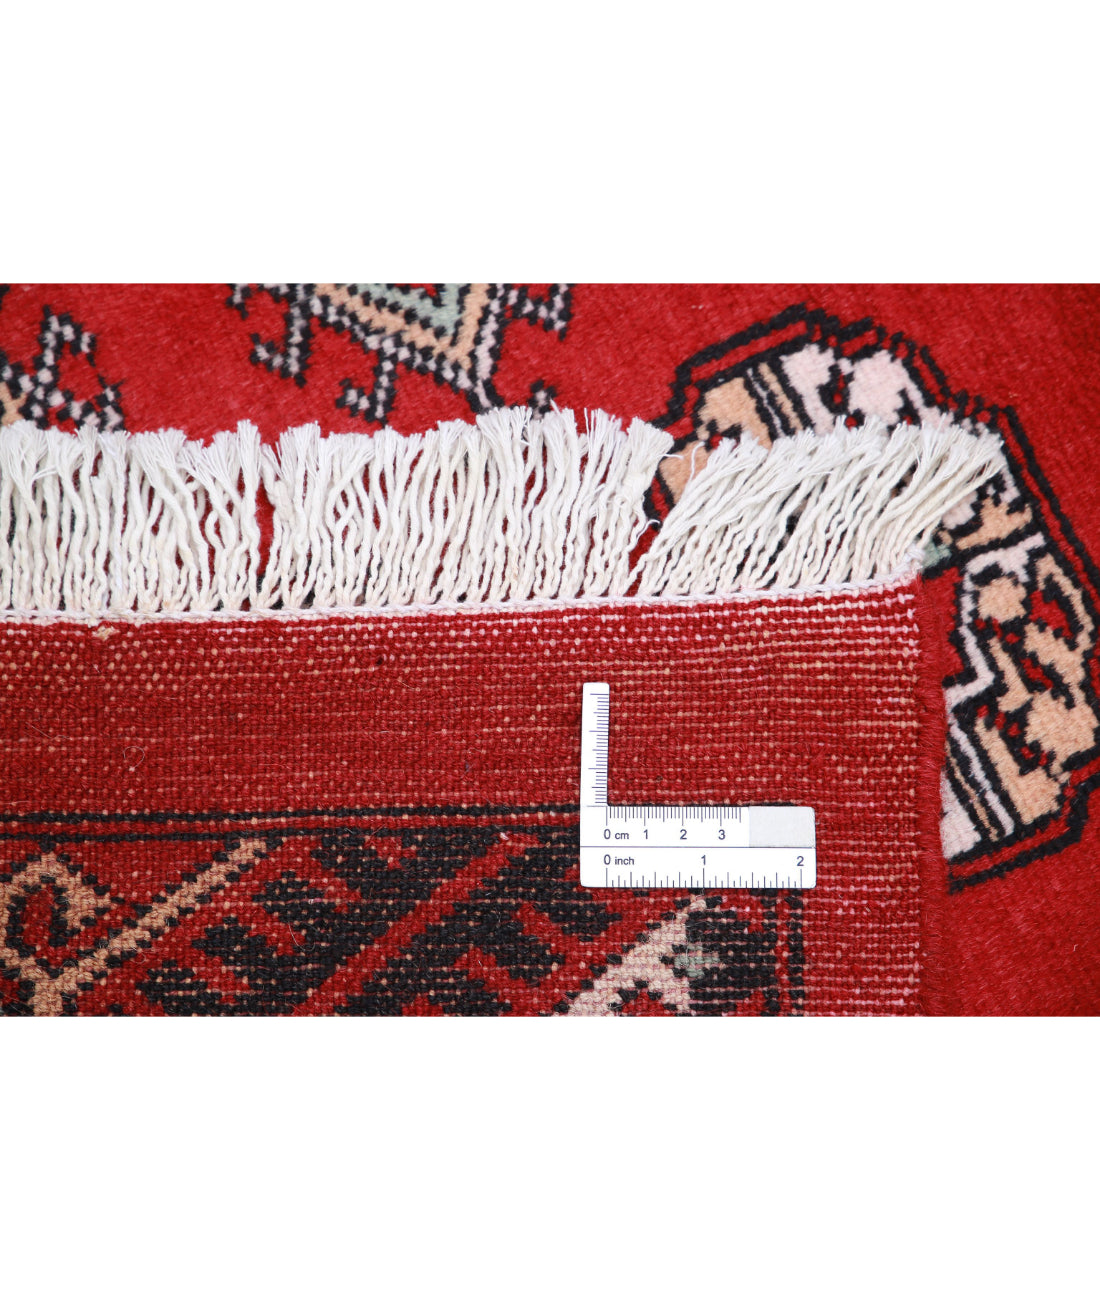 Hand Knotted Tribal Bokhara Wool Rug - 6'2'' x 9'2'' 6'2'' x 9'2'' (185 X 275) / Red / Black